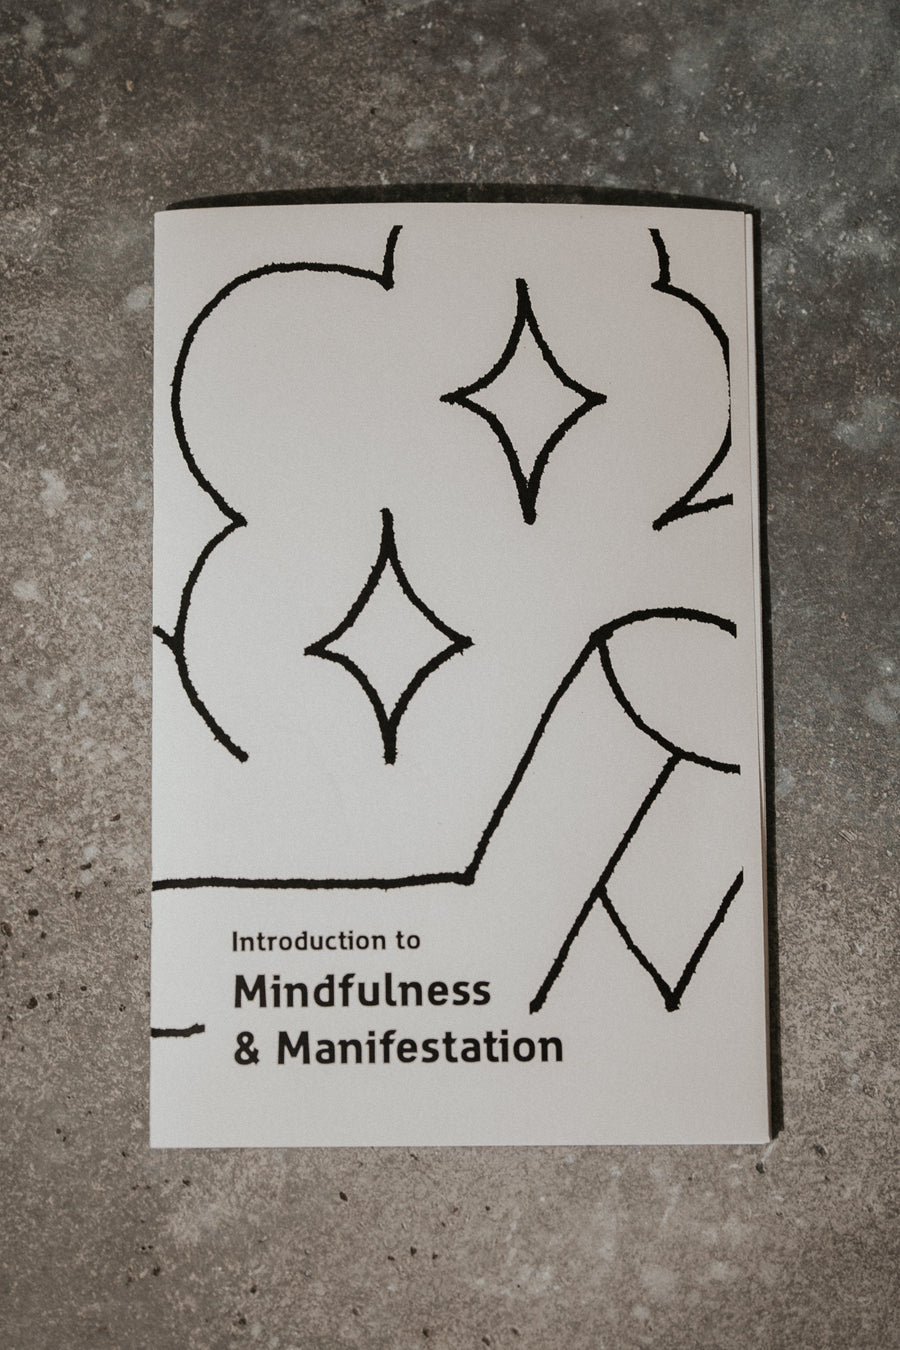 School of Life Design Objects White / FINAL SALE Introduction to Mindfulness & Manifestation